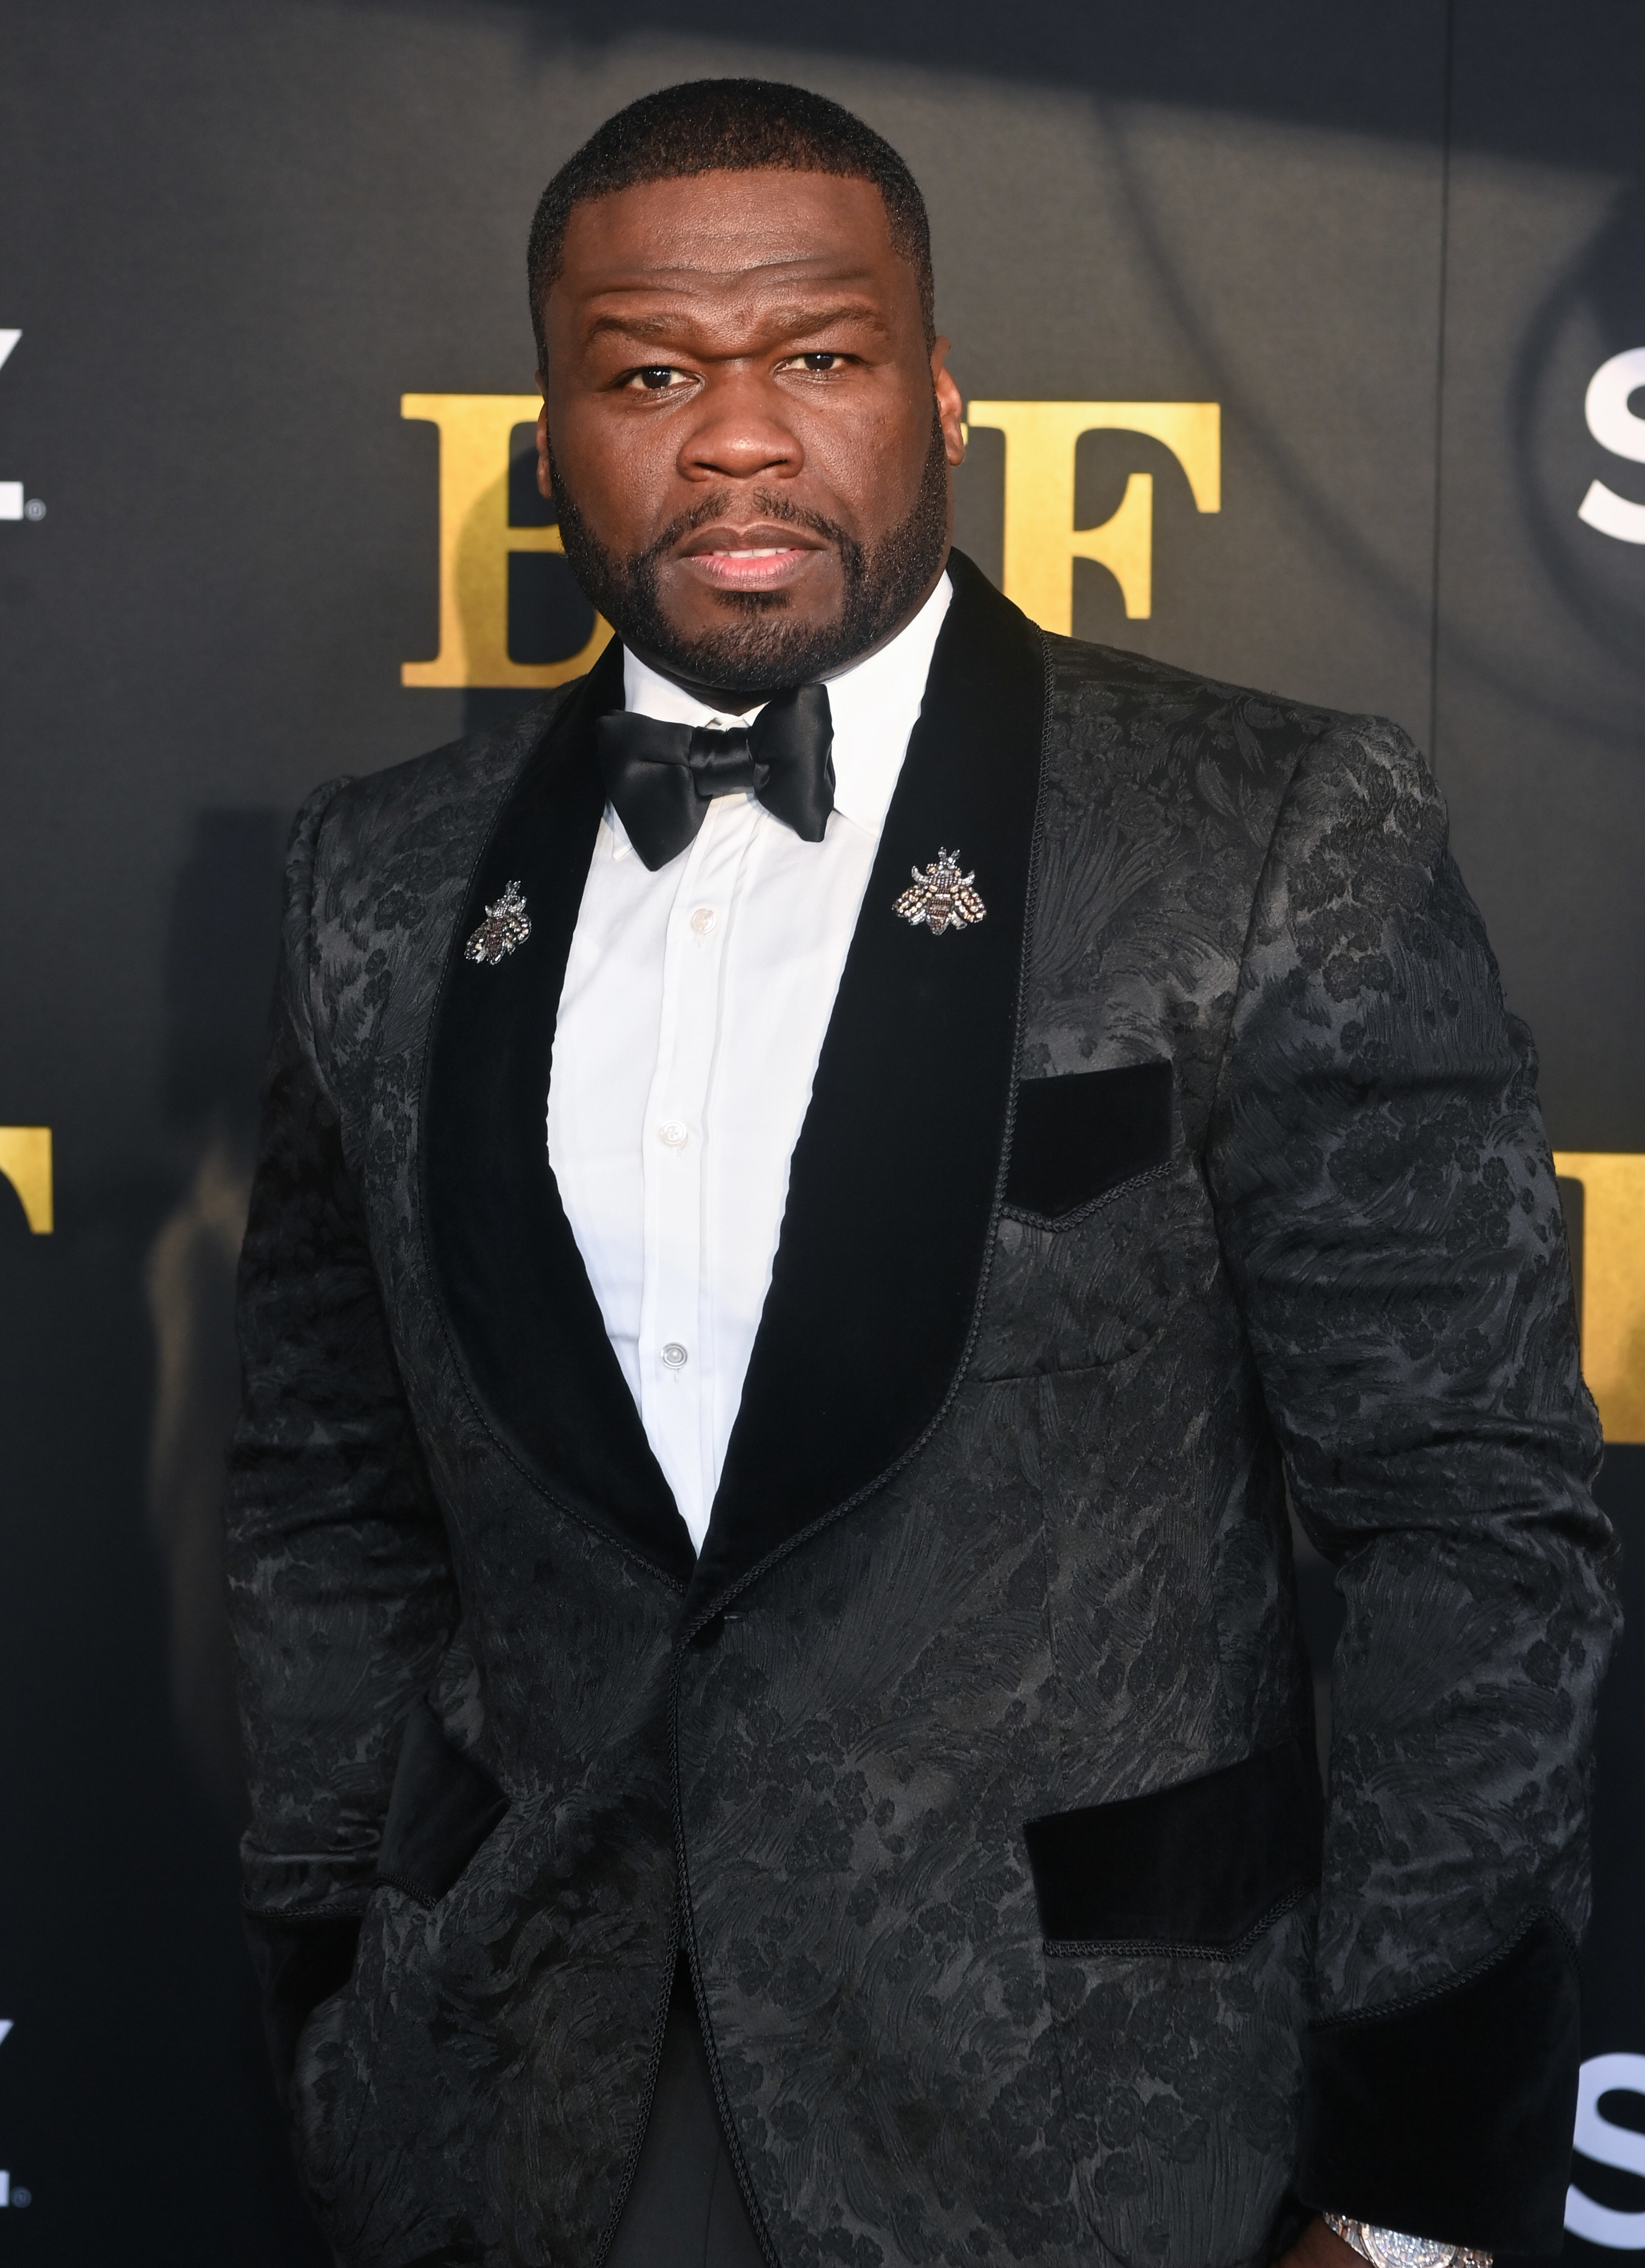 50 Cent in a tux at an event